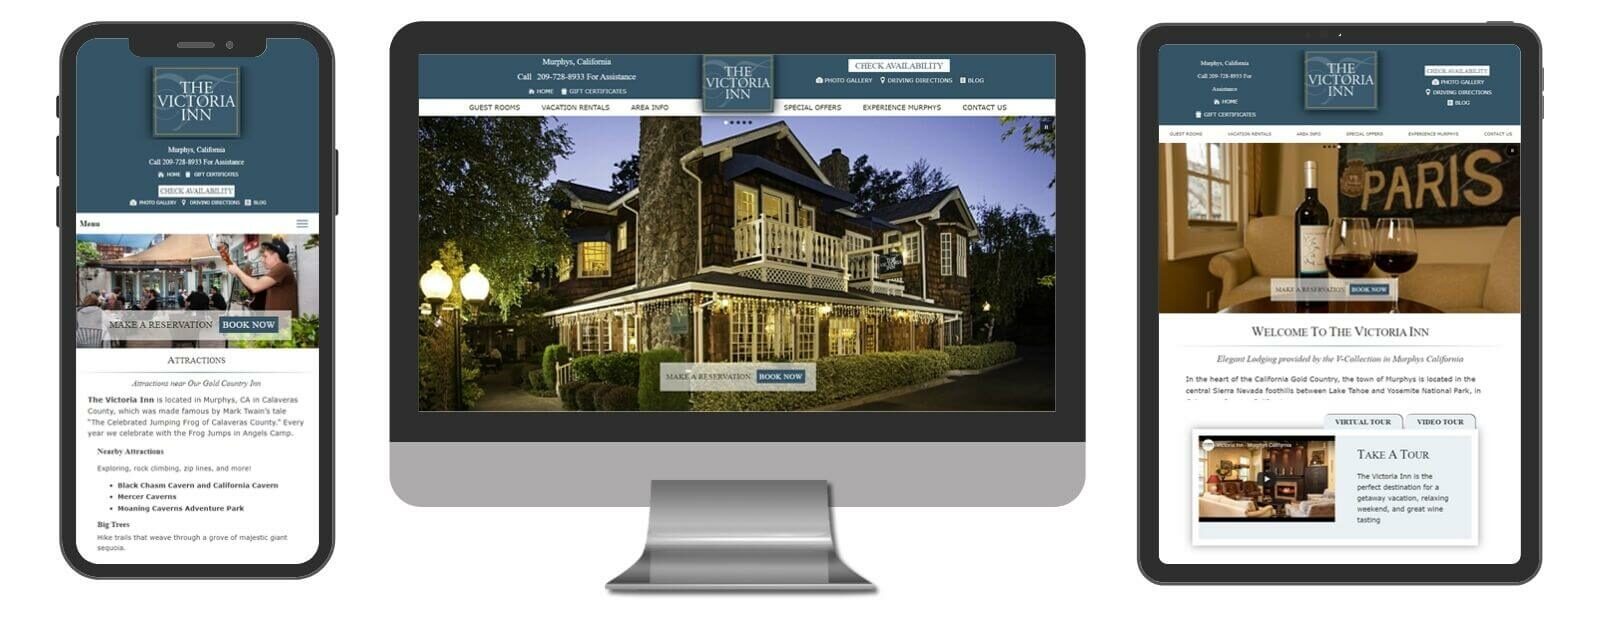 The Victoria Inn website displayed in 3 sizes - mobile, template and desktop